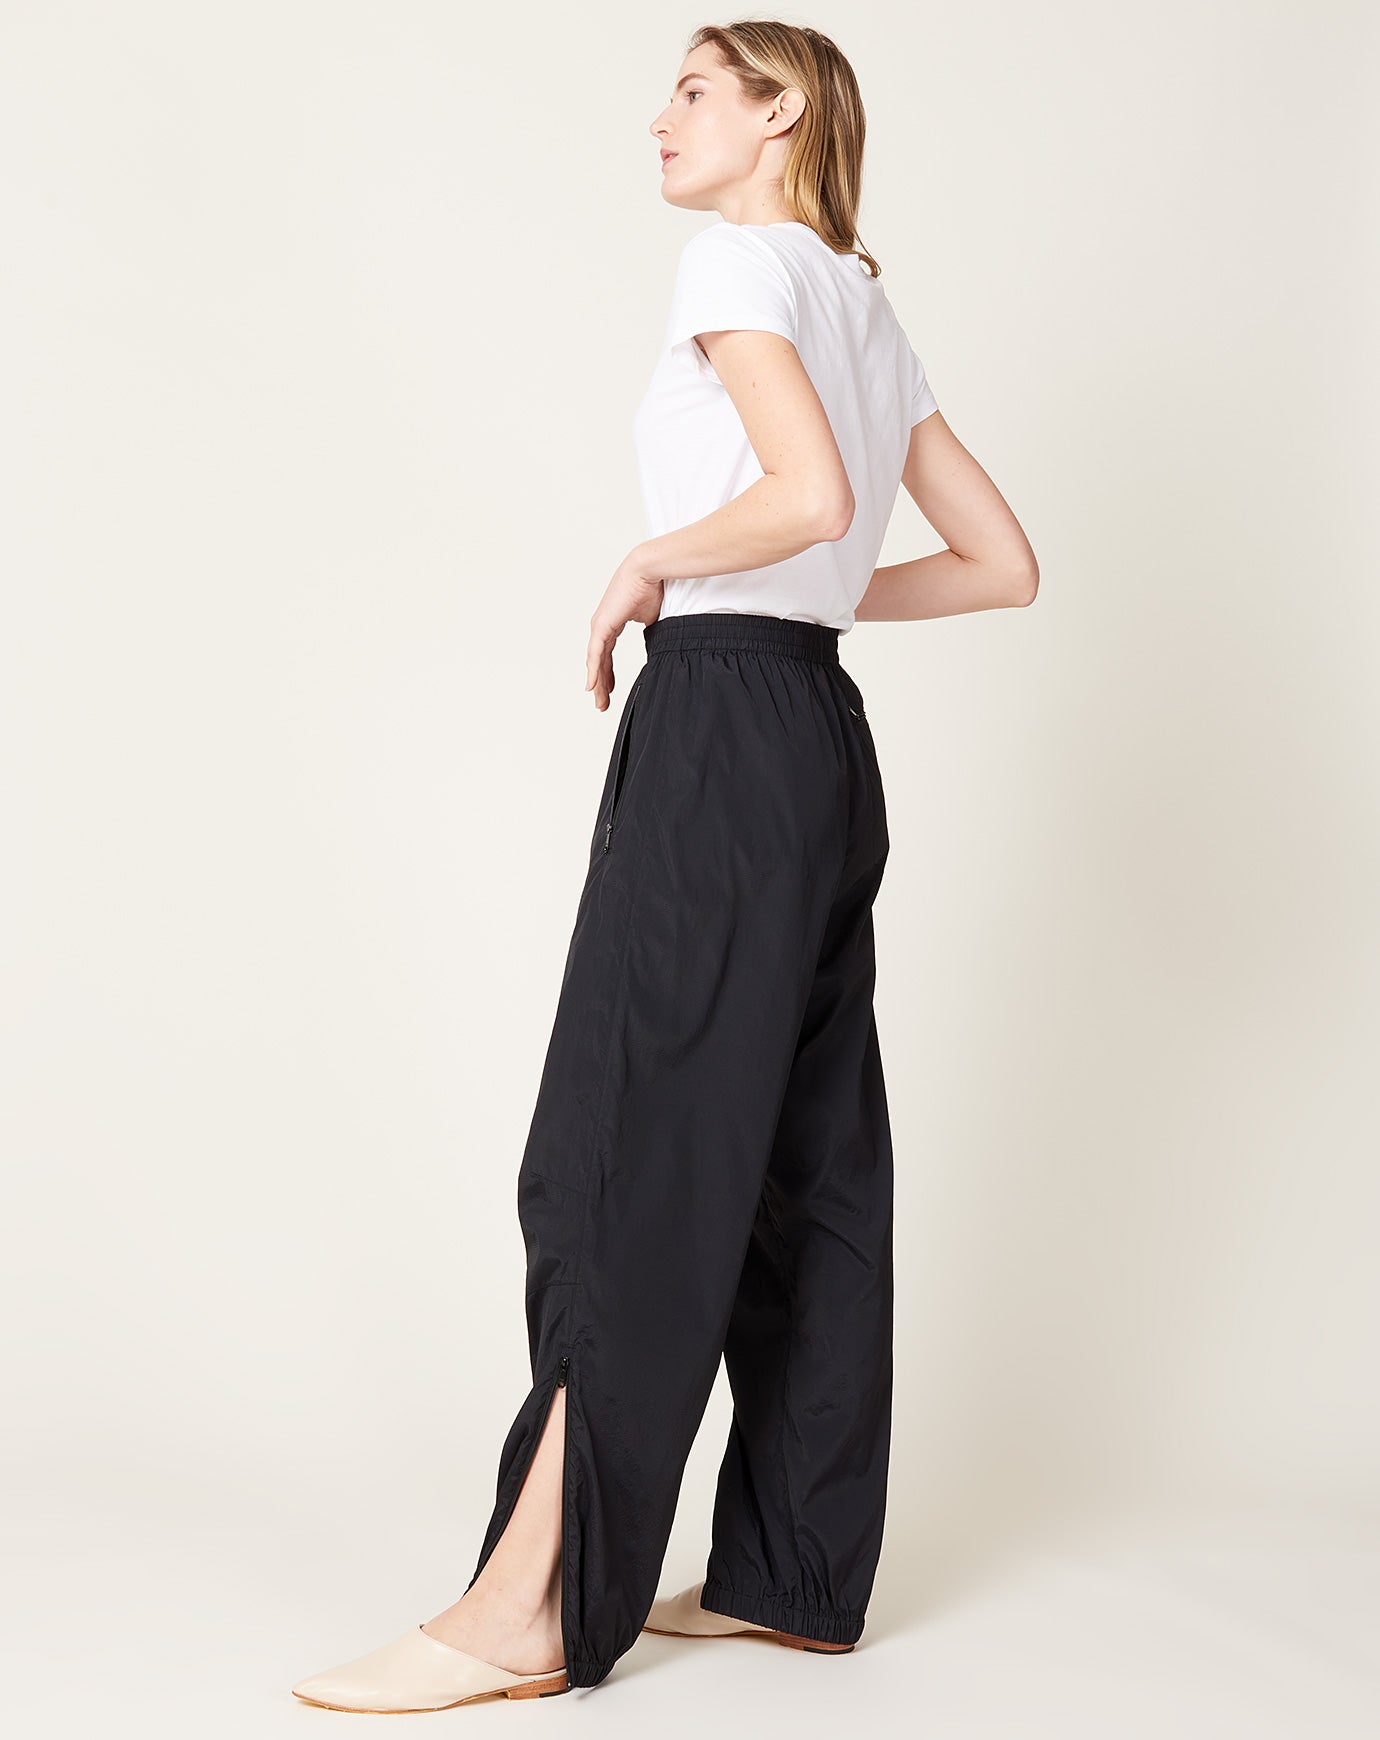 Packable Warm Up Pant in Black